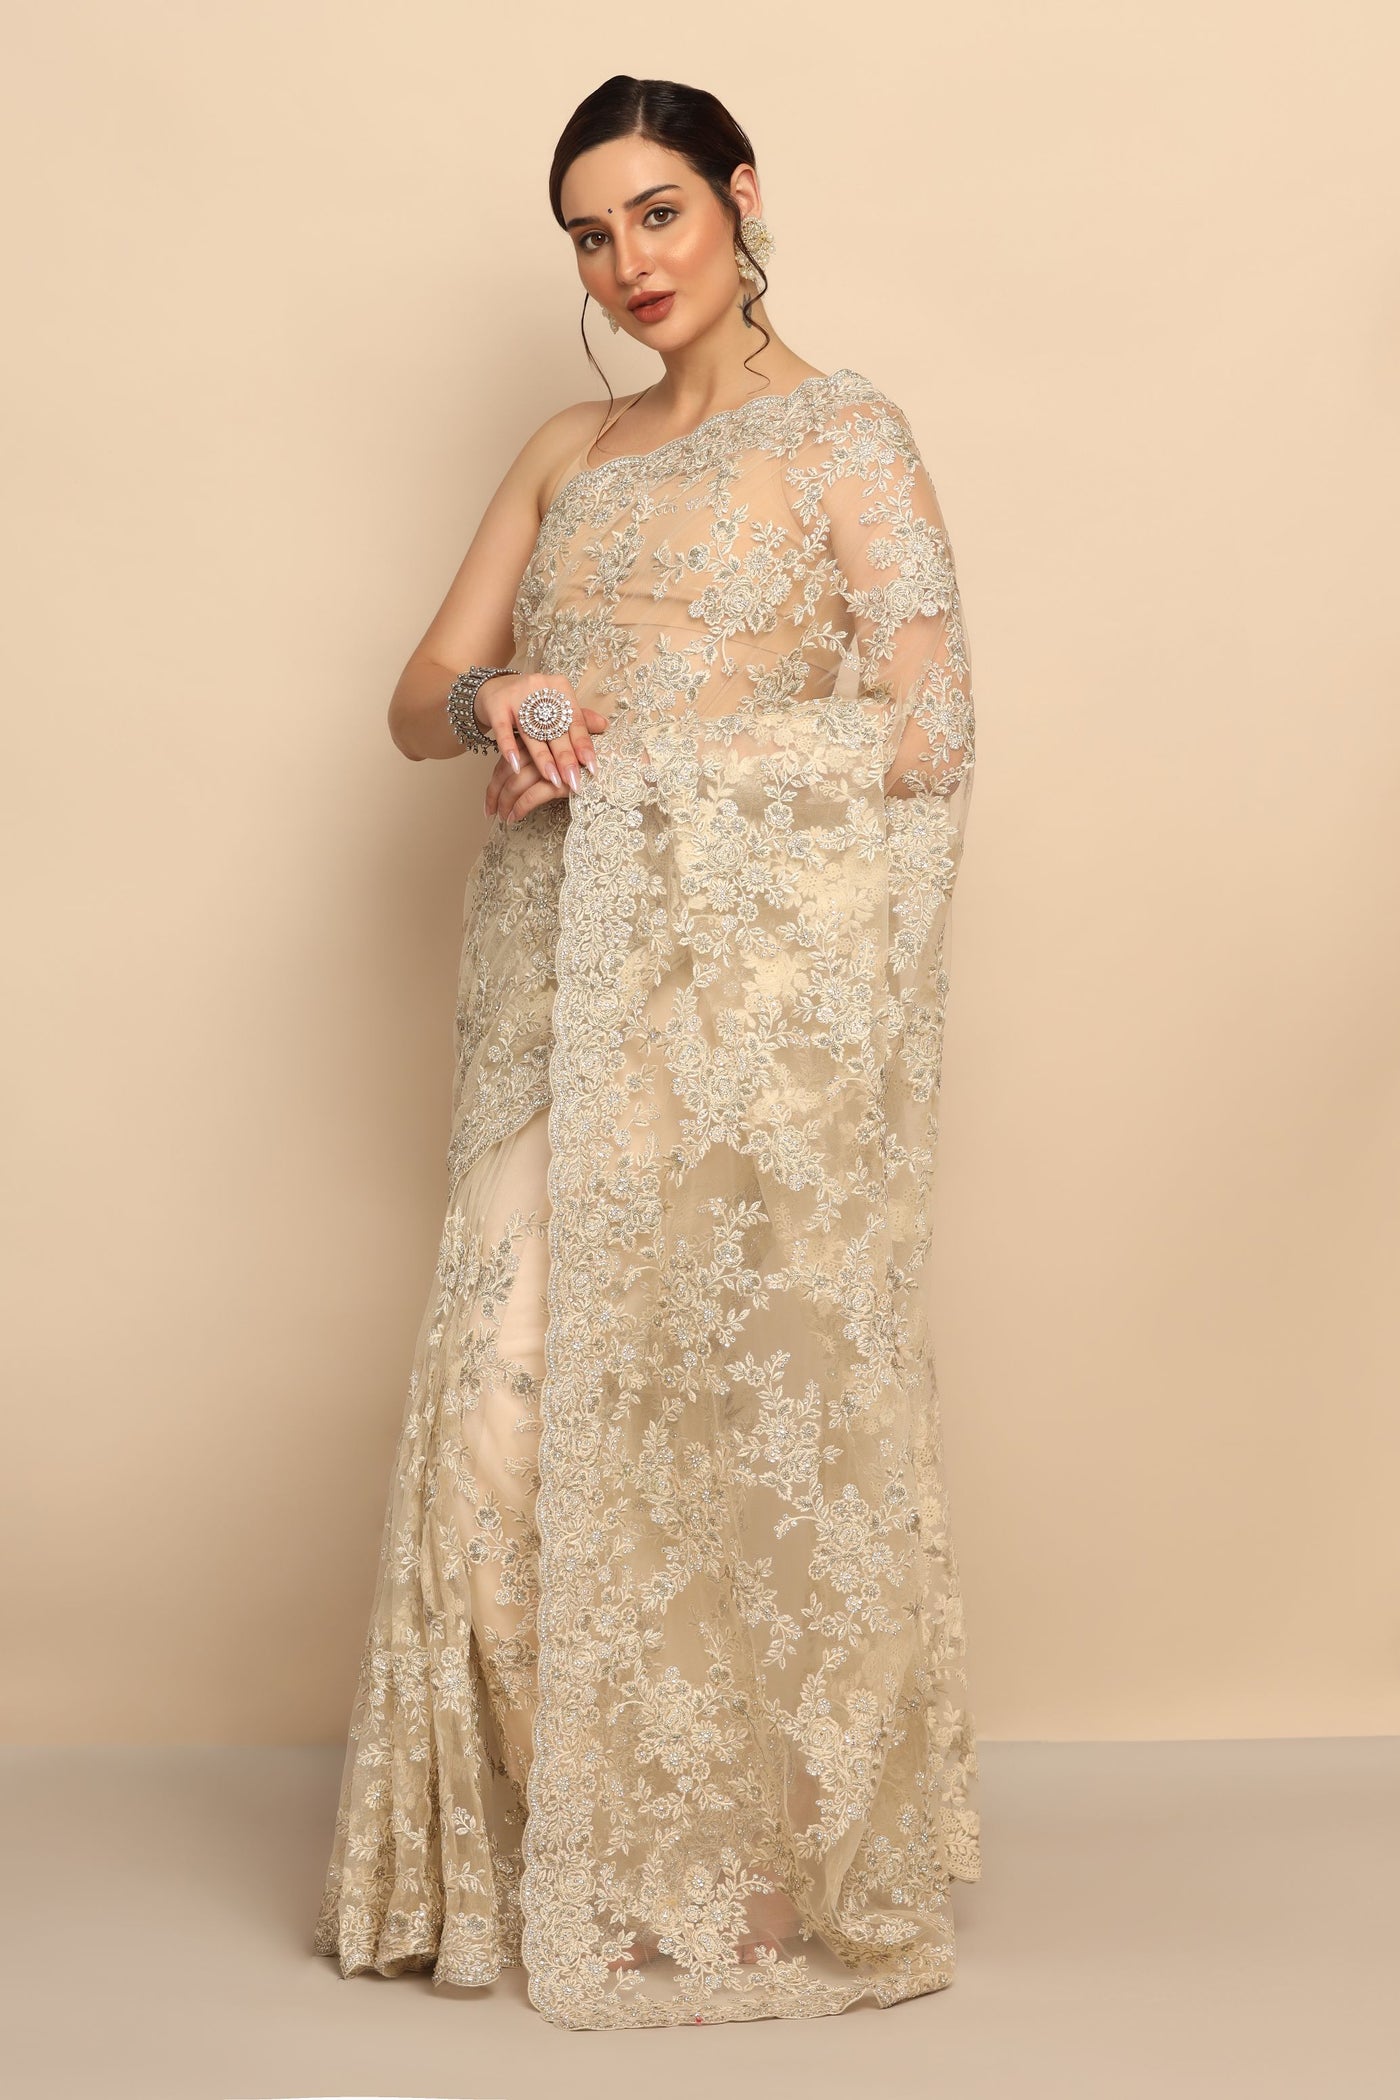 Radiant White Net Saree with Thread Work, Sequins, and Zari